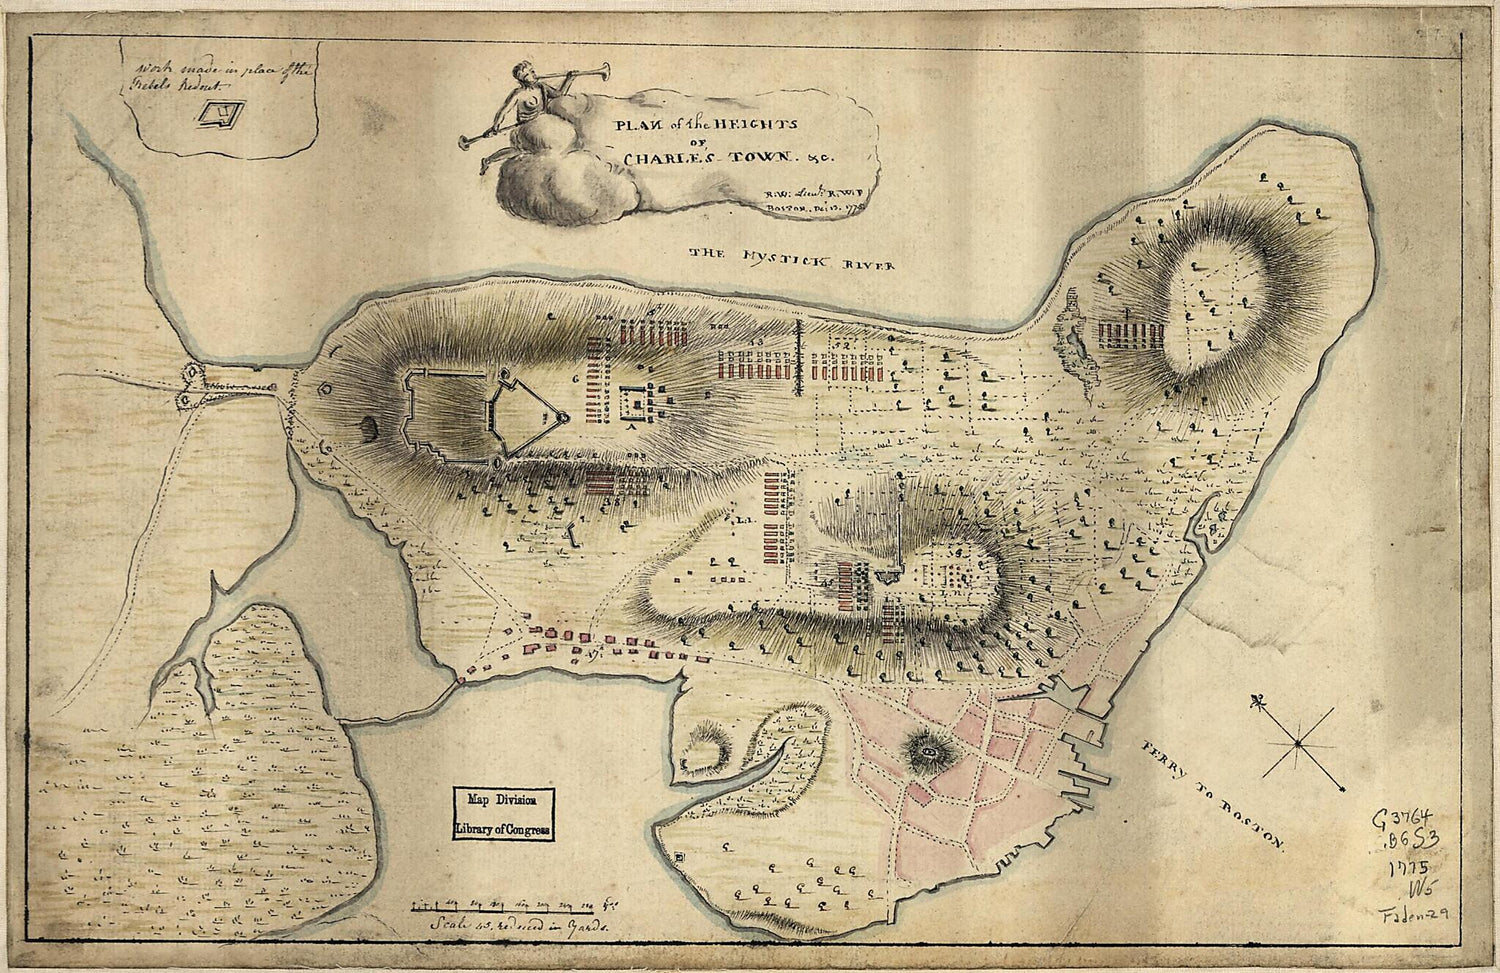 This old map of Plan of the Heights of Charles Town, &amp;c from 1775 was created by Richard Williams in 1775